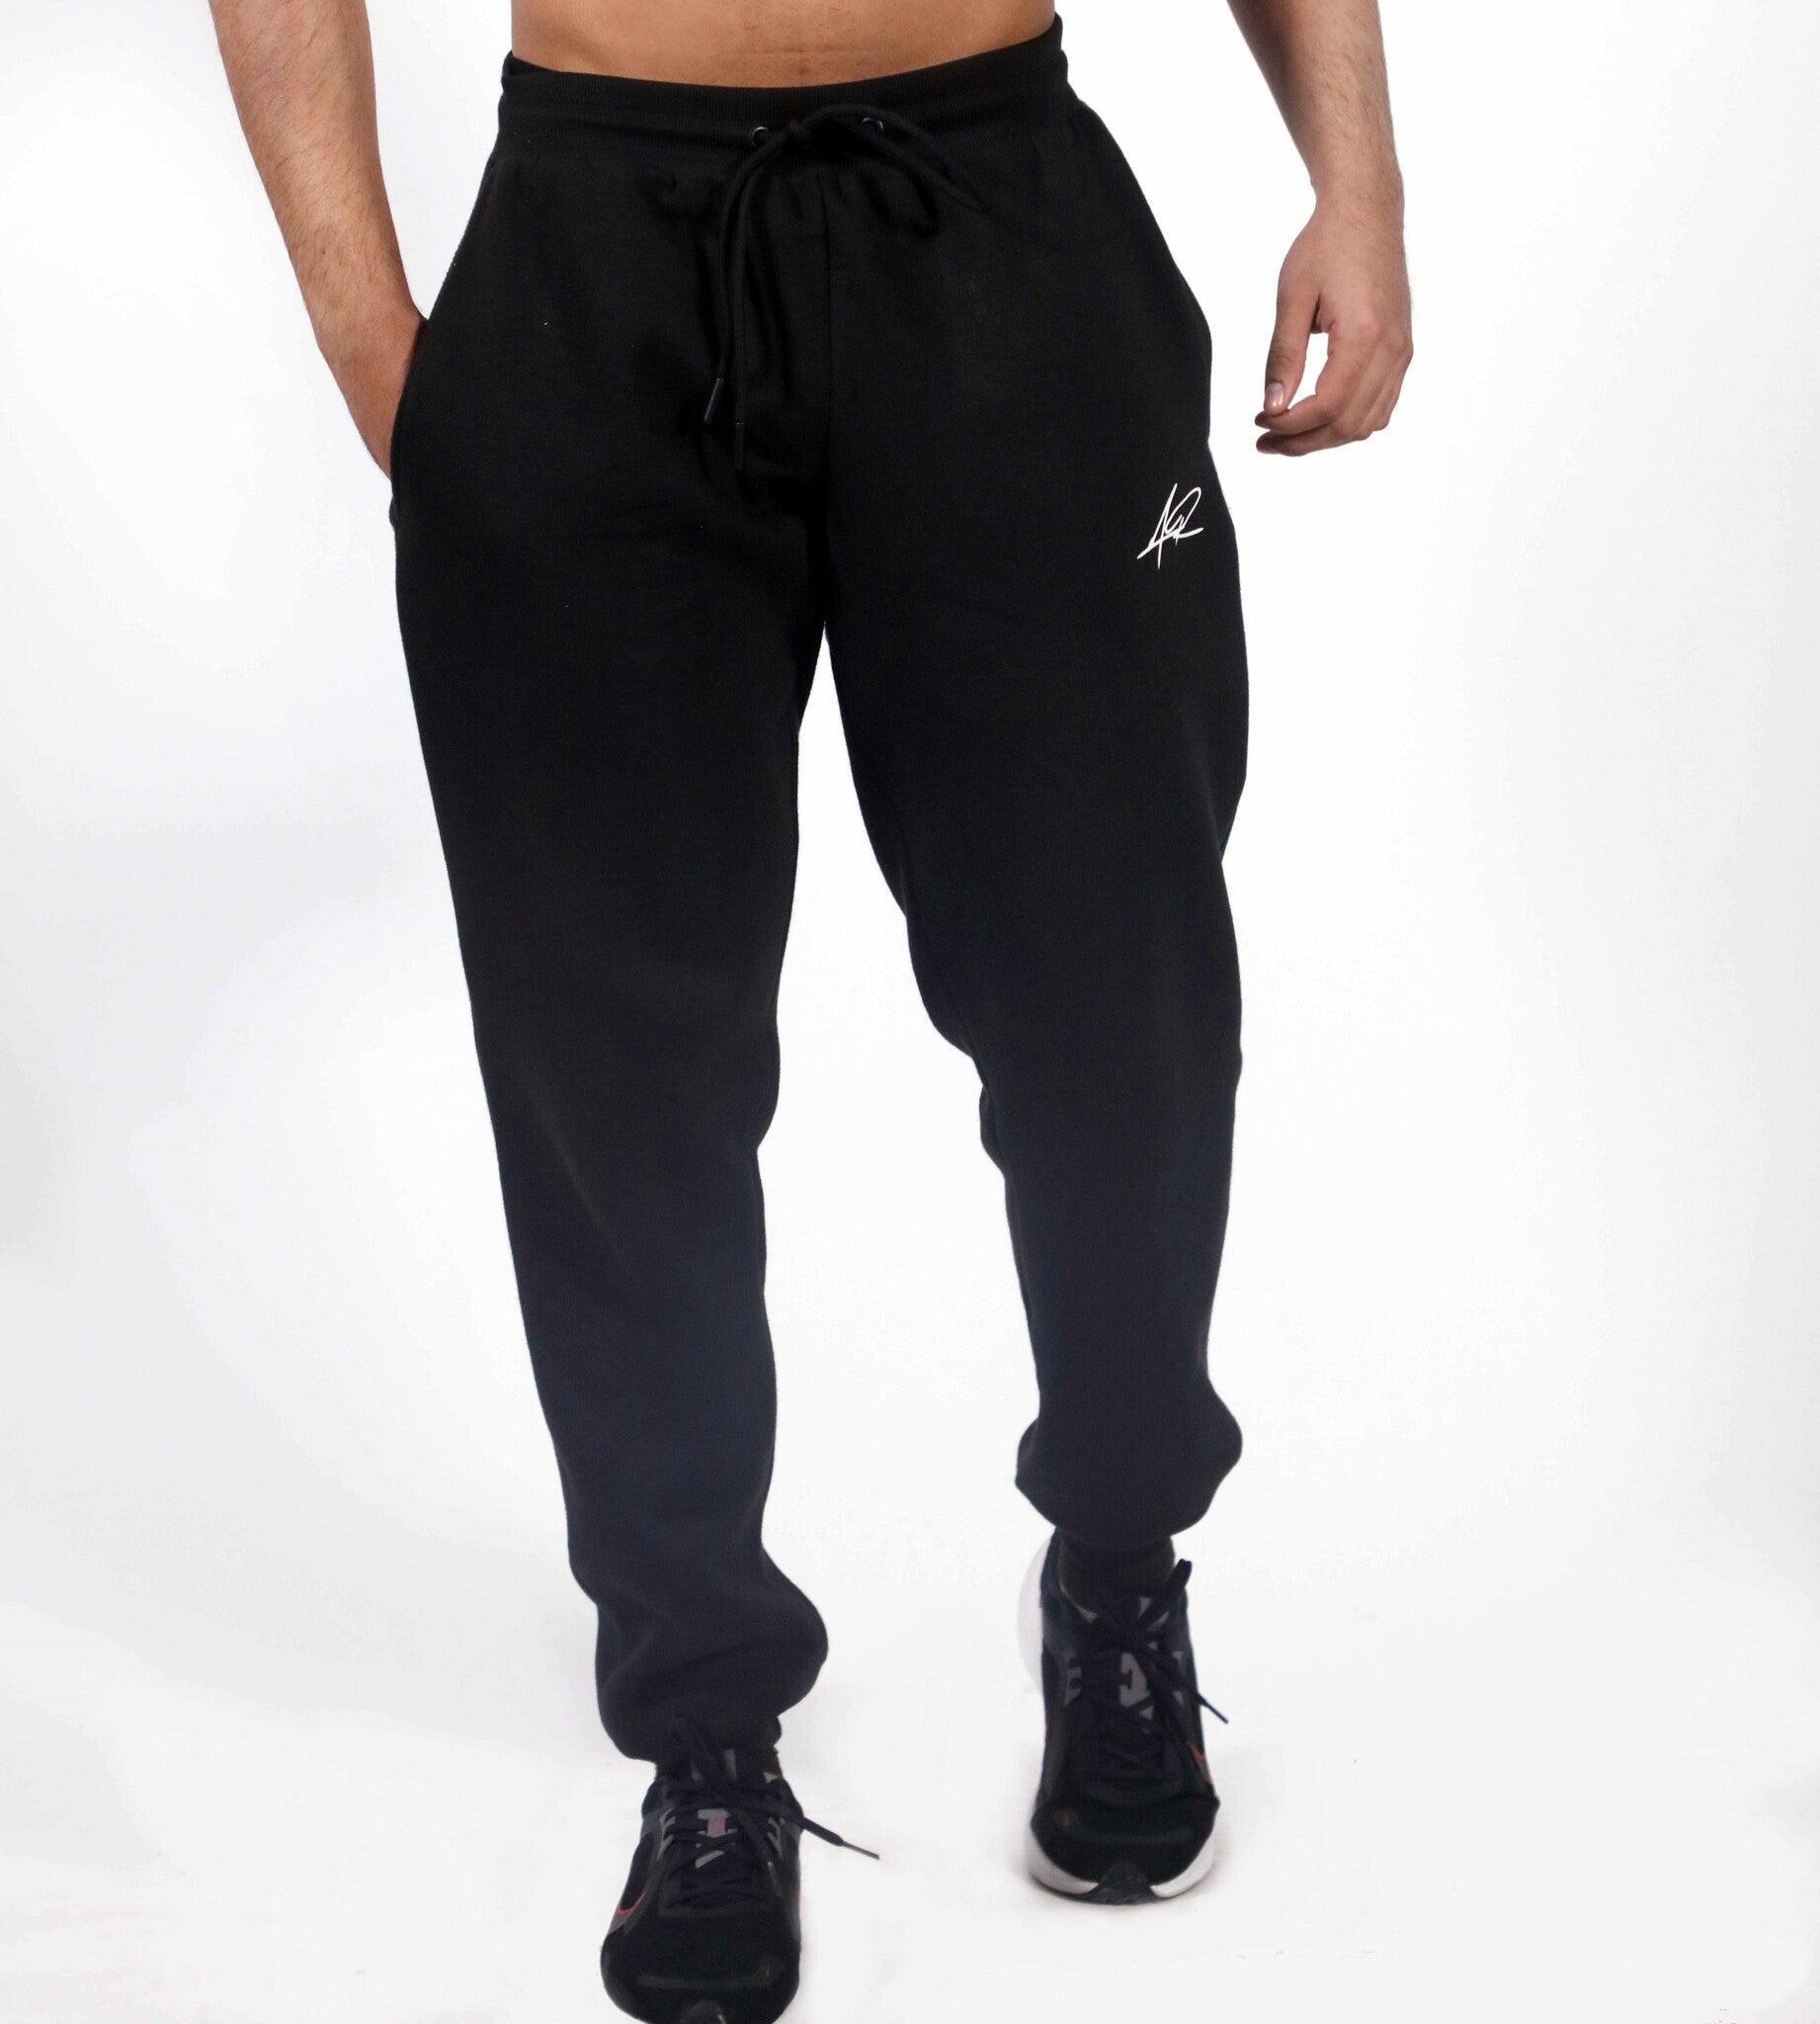 SST Forge Joggers